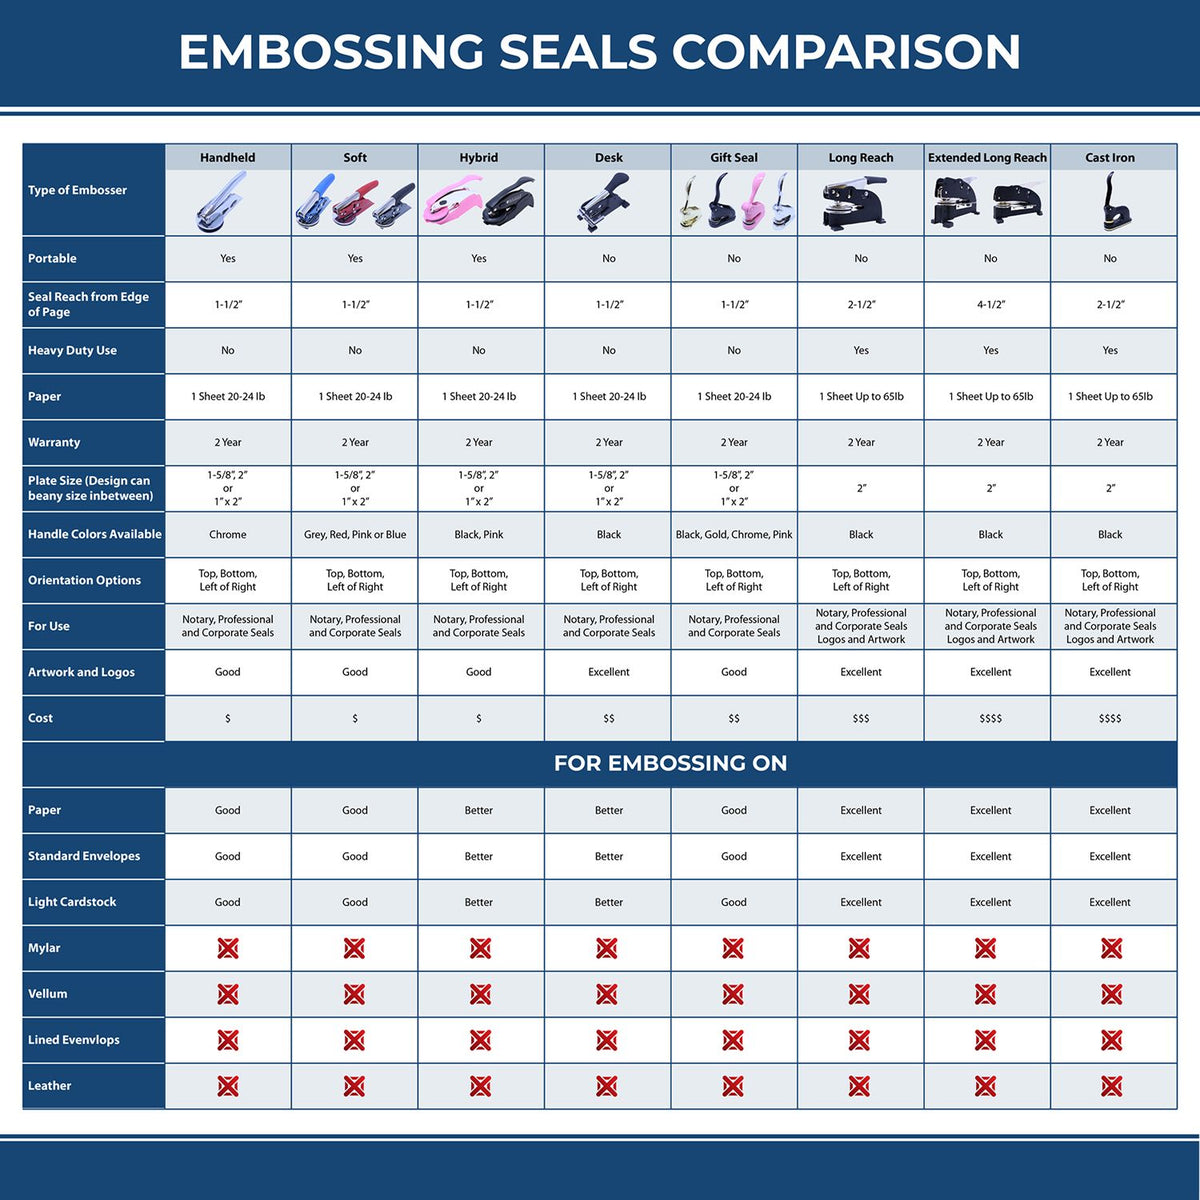 A comparison chart for the different types of mount models available for the Handheld Washington Architect Seal Embosser.